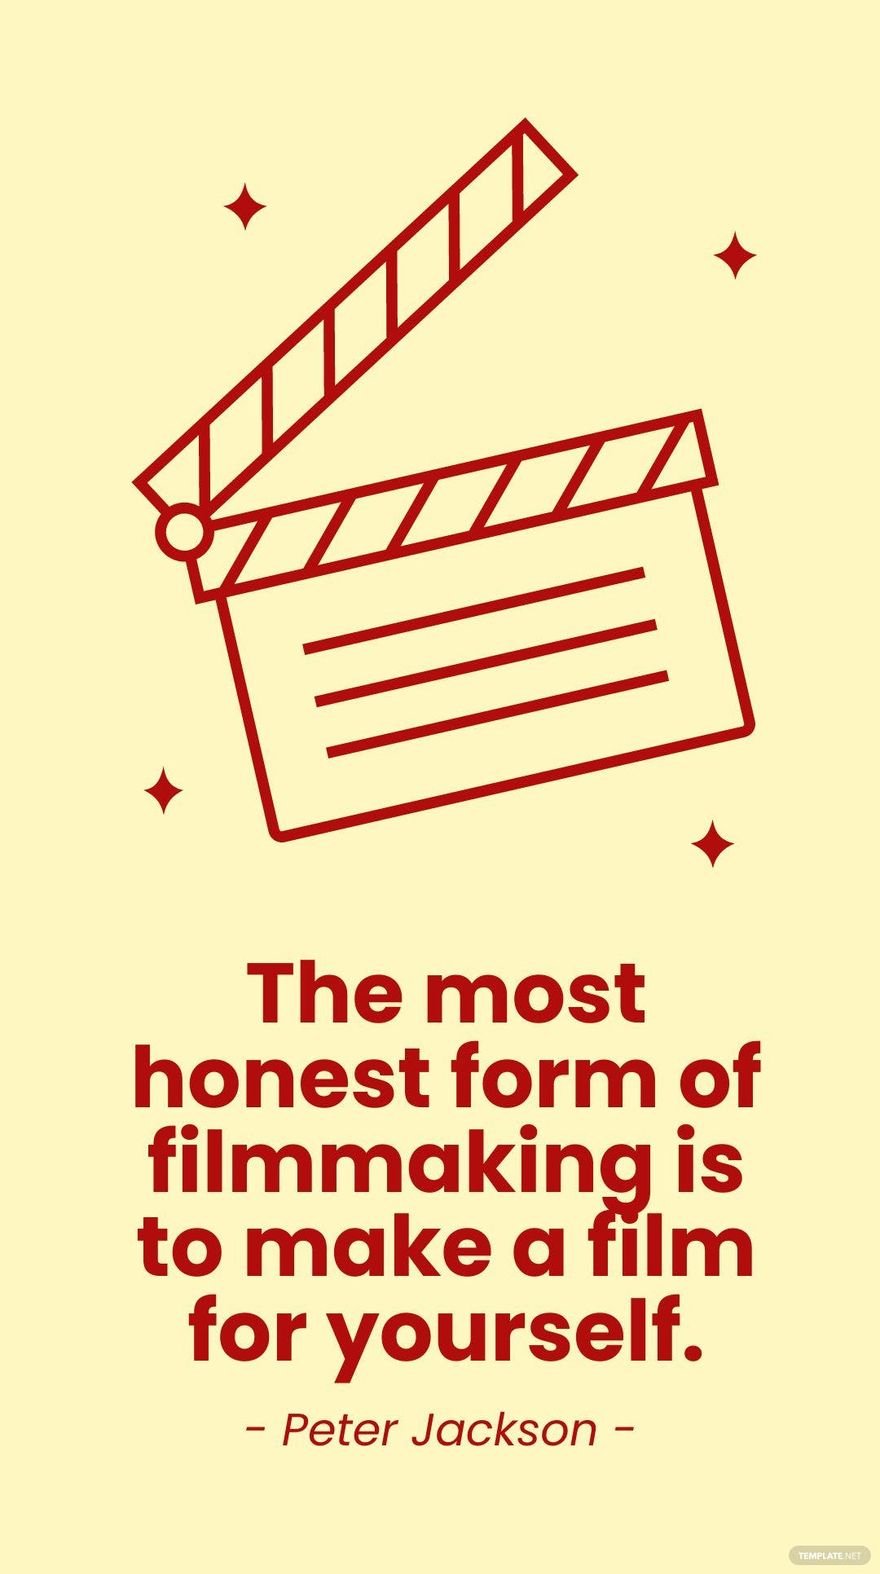 Free Peter Jackson - The most honest form of filmmaking is to make a film for yourself. in JPG